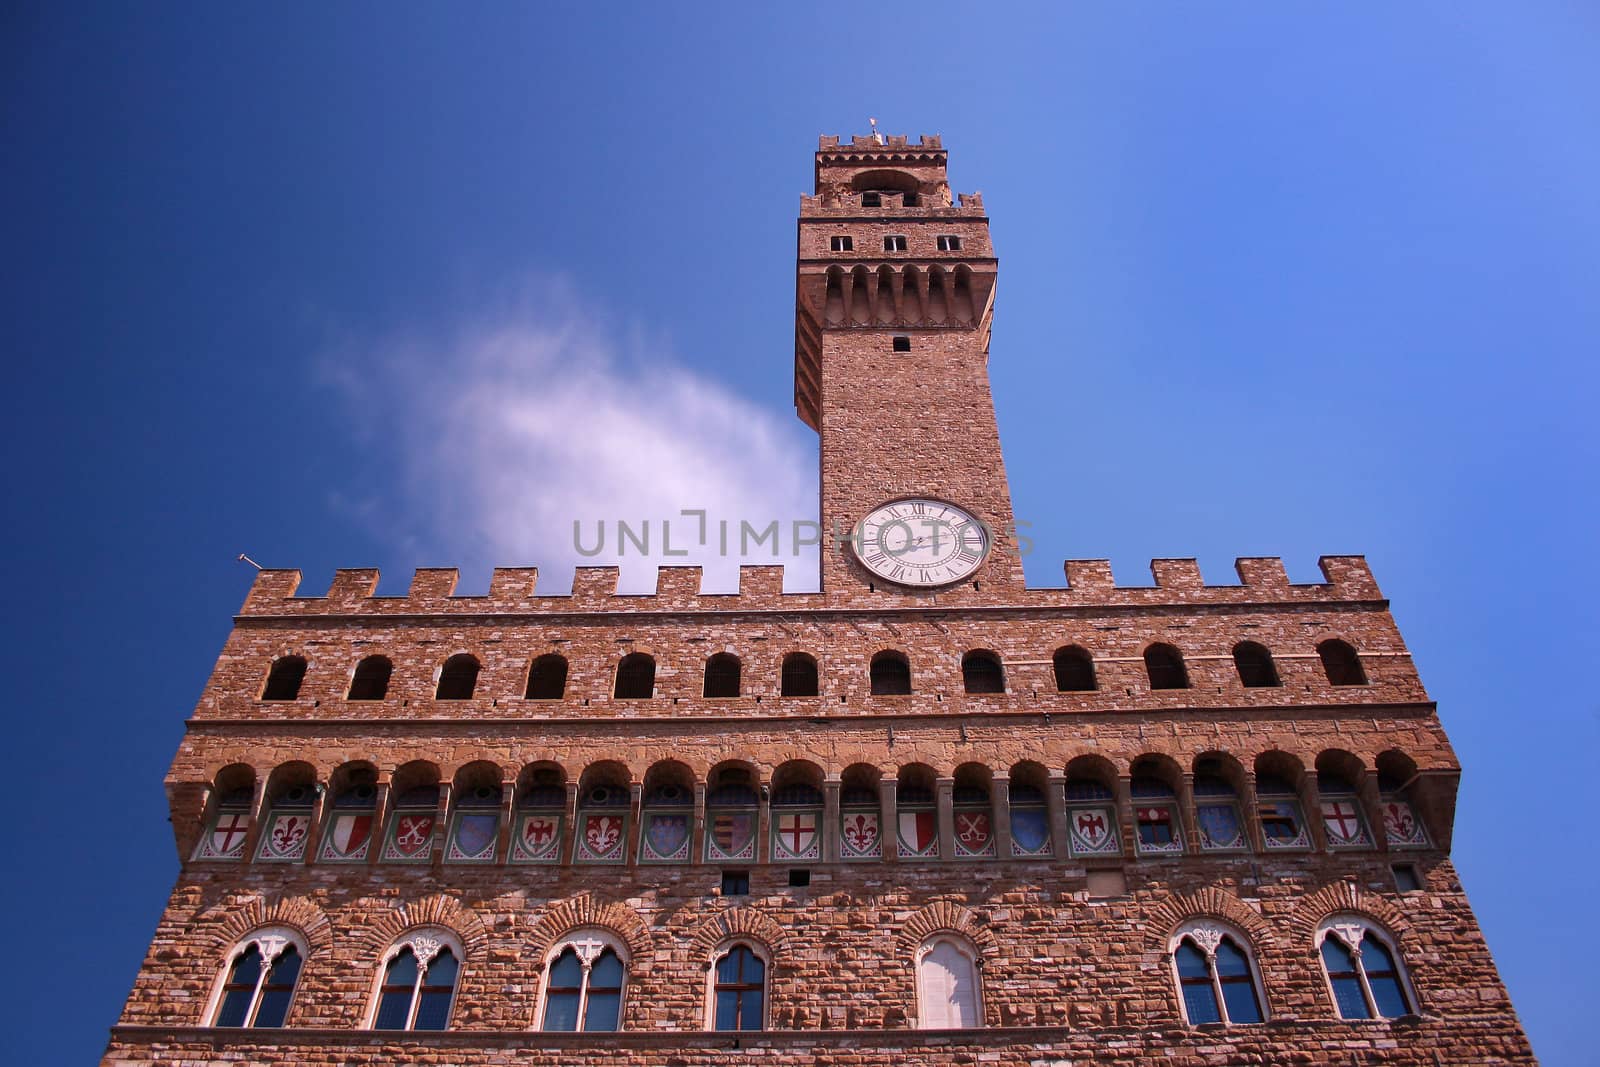 Romanesque building of Palazzo Vecchio � Old Palace � a famous landmark in Florence, Italy